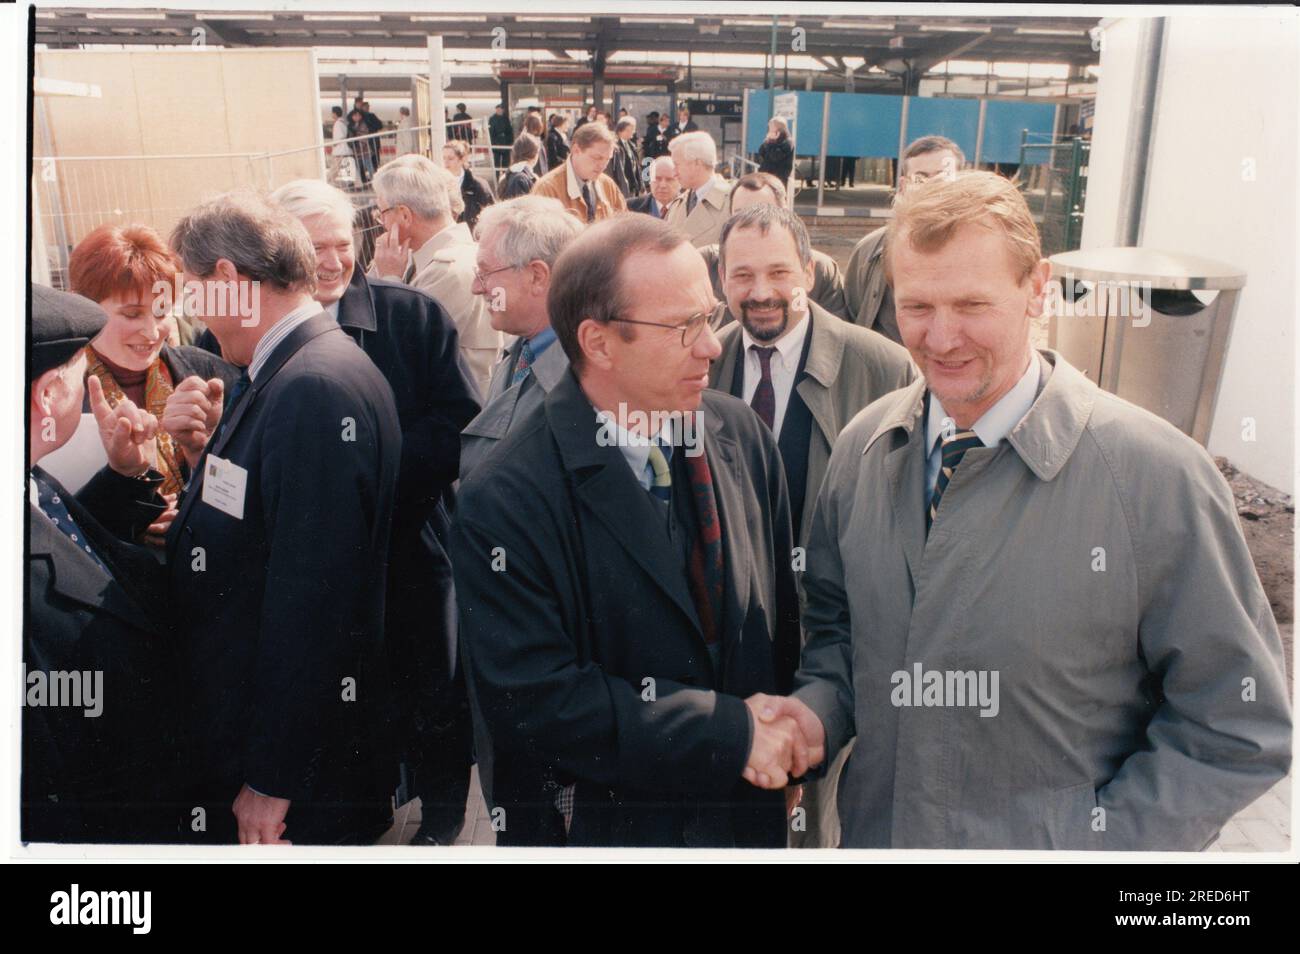 Transport ministers from 34 European countries visit Potsdam after the 81st conference in Berlin. Arrival at the city train station. Federal Minister of Transport Matthias Wissmann (l.) and Brandenburg's Minister of Transport Meyer (r.). Minister. Transport. Foreign visit. Foreign economic relations. Photo: MAZ/Archive, 1997Transport ministers from 34 European countries visit Potsdam after the 81st conference in Berlin. Arrival at the city train station. Federal Minister of Transport Matthias Wissmann (l.) and Brandenburg's Minister of Transport Meyer (r.). Photo: MAZ/Archive, 1997 [automated Stock Photo